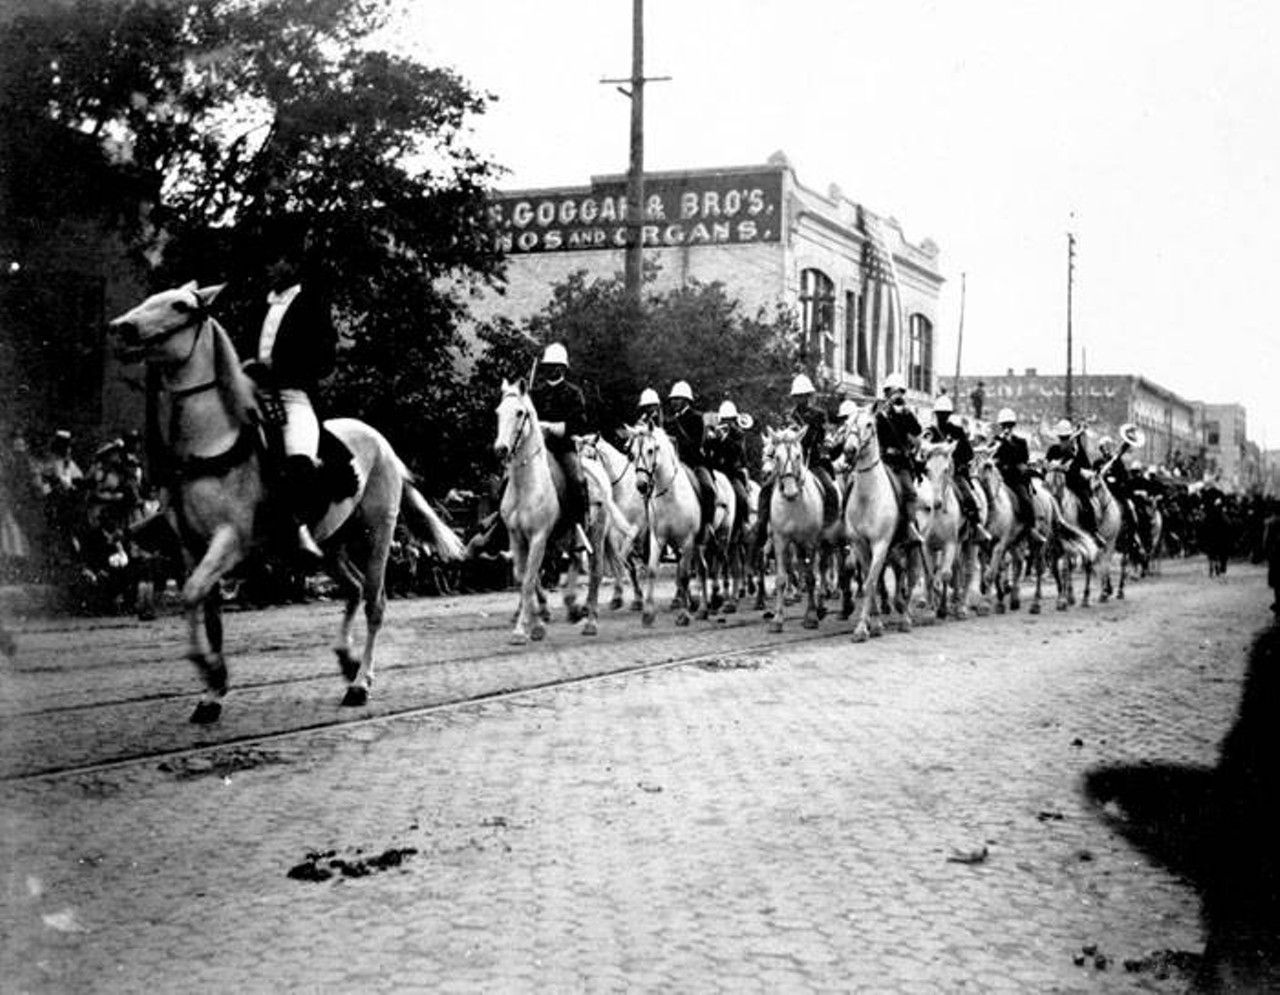 5th U. S. Cavalry mounted band in Battle of Flowers Parade, San Antonio, Texas, 1897
Here comes the cavalry! This mounted band clopped down the streets of San Antonio over 120 years ago.